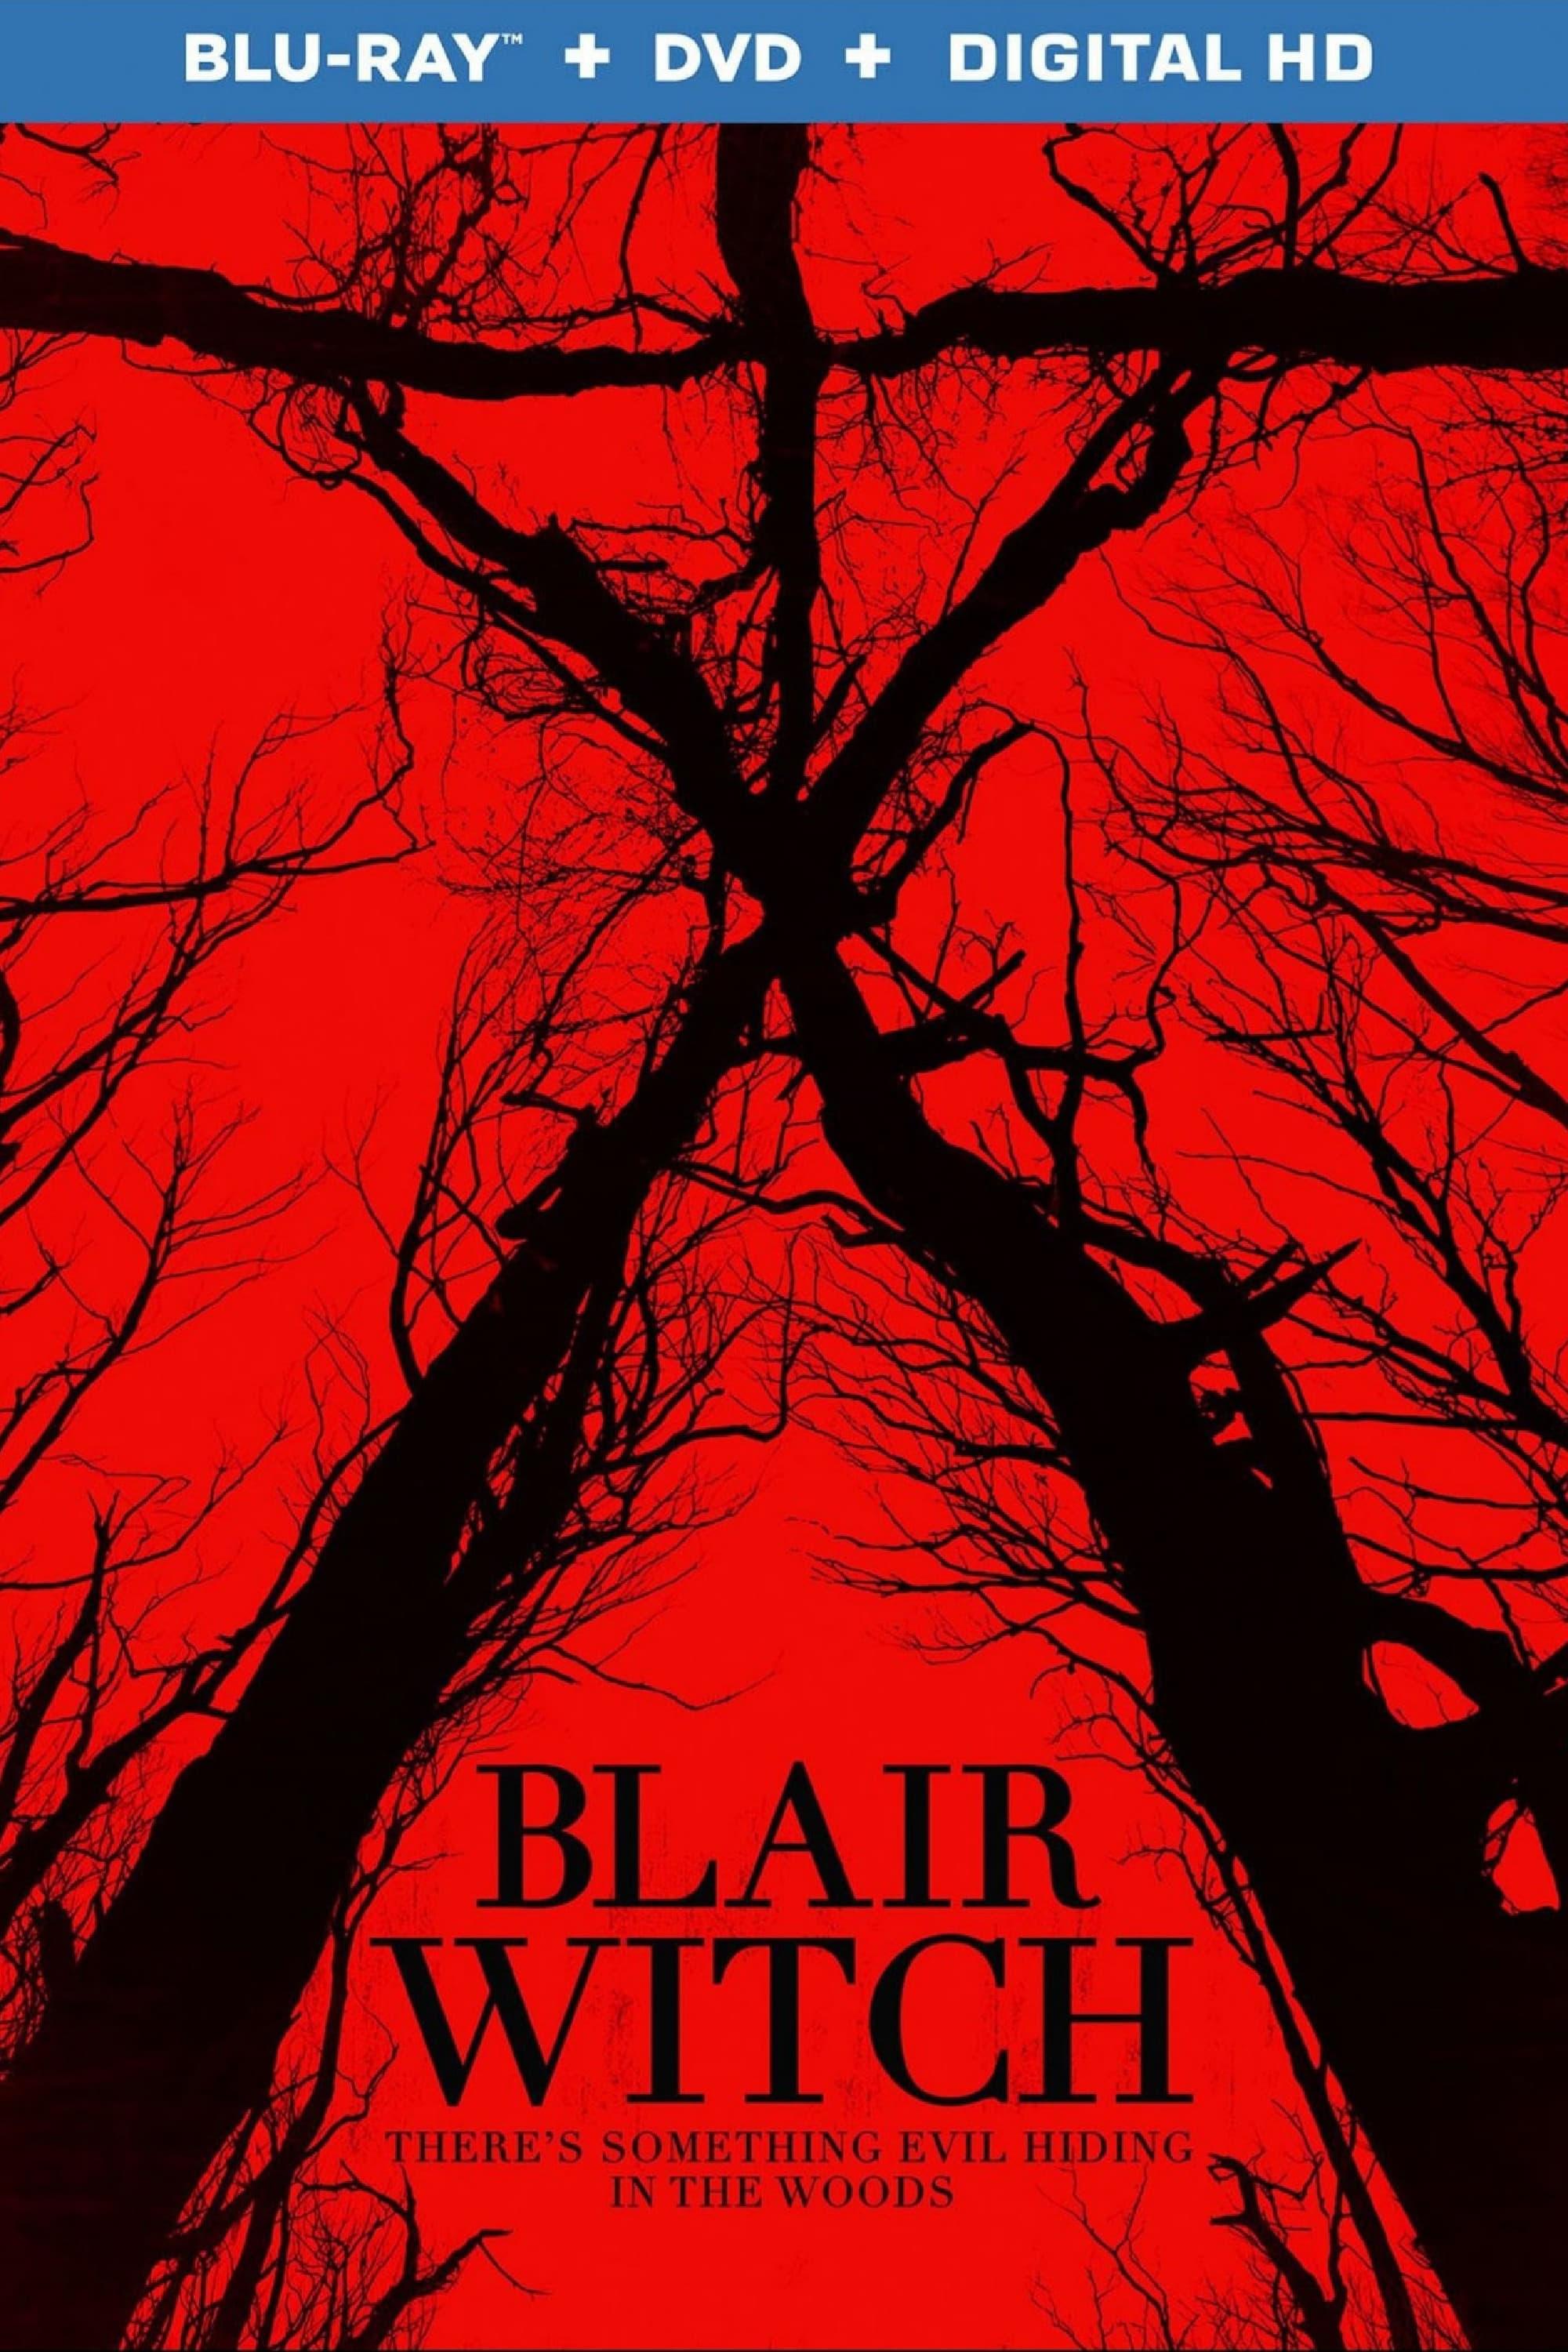 Neverending Night: The Making of Blair Witch poster